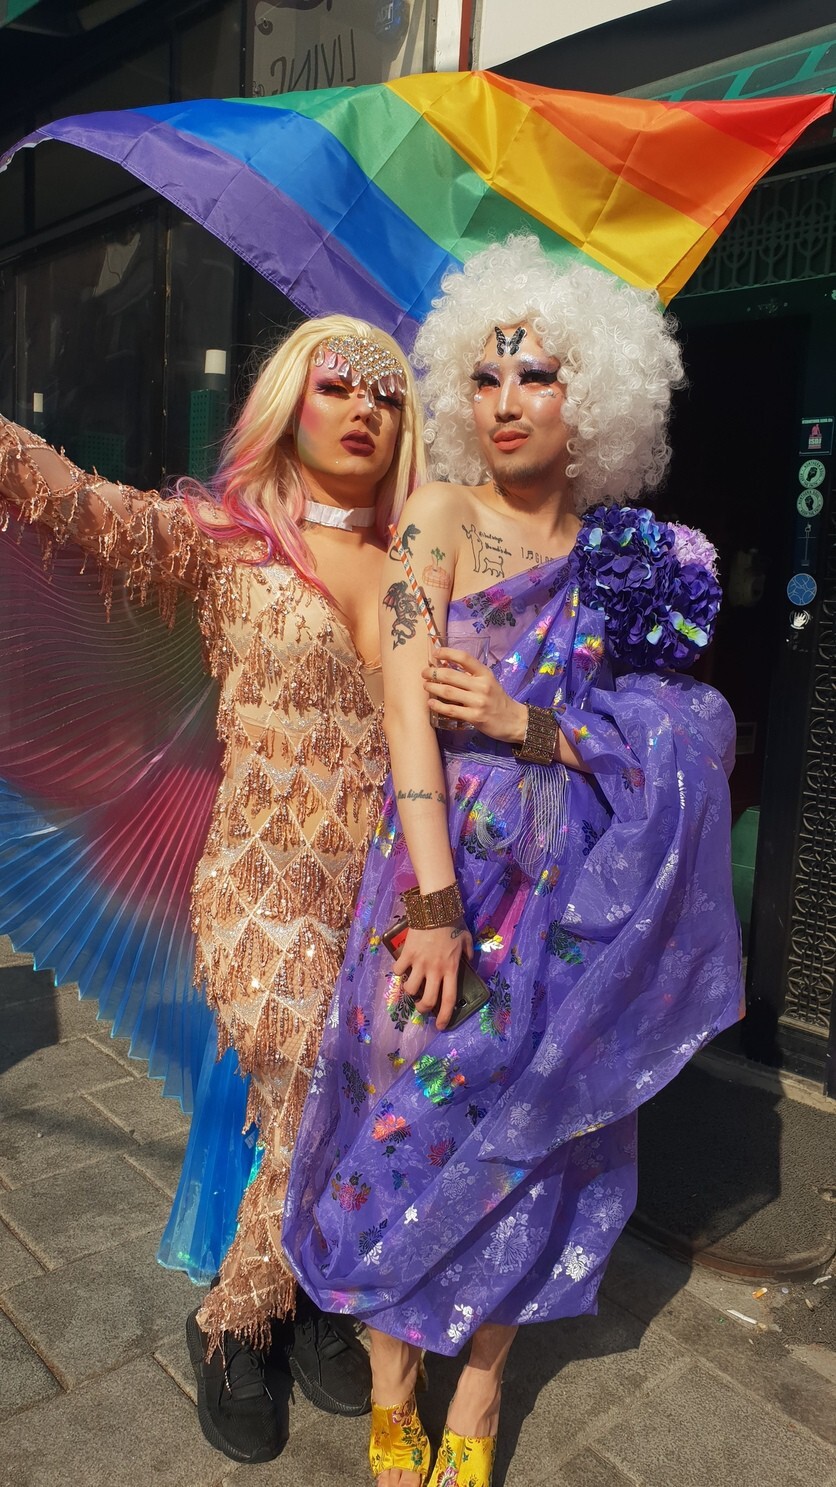 Participants in the Seoul Drag Parade on May 5